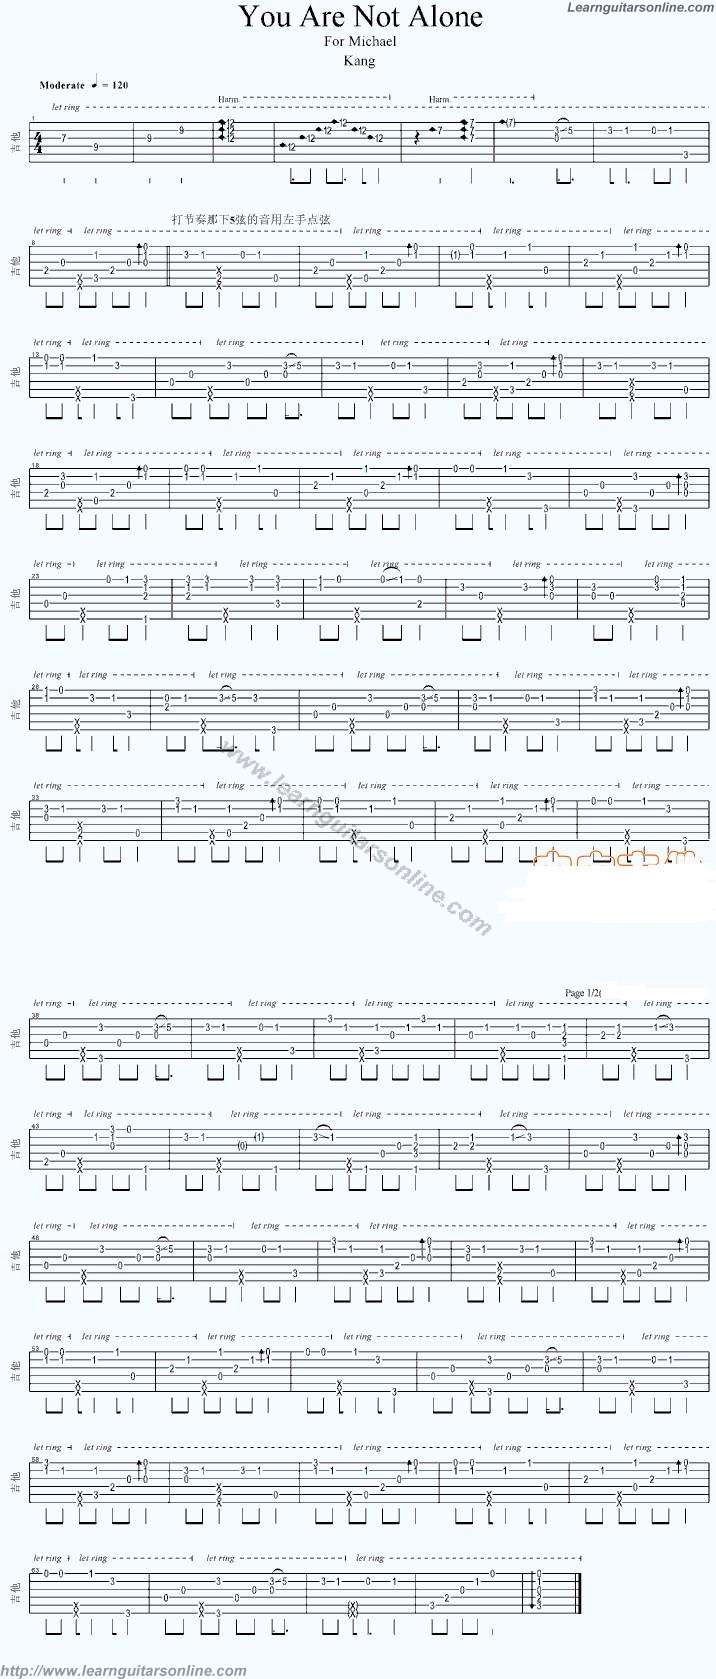 You Are Not Alone by Michael Jackson Guitar Tabs Chords Solo Notes Sheet Music Free